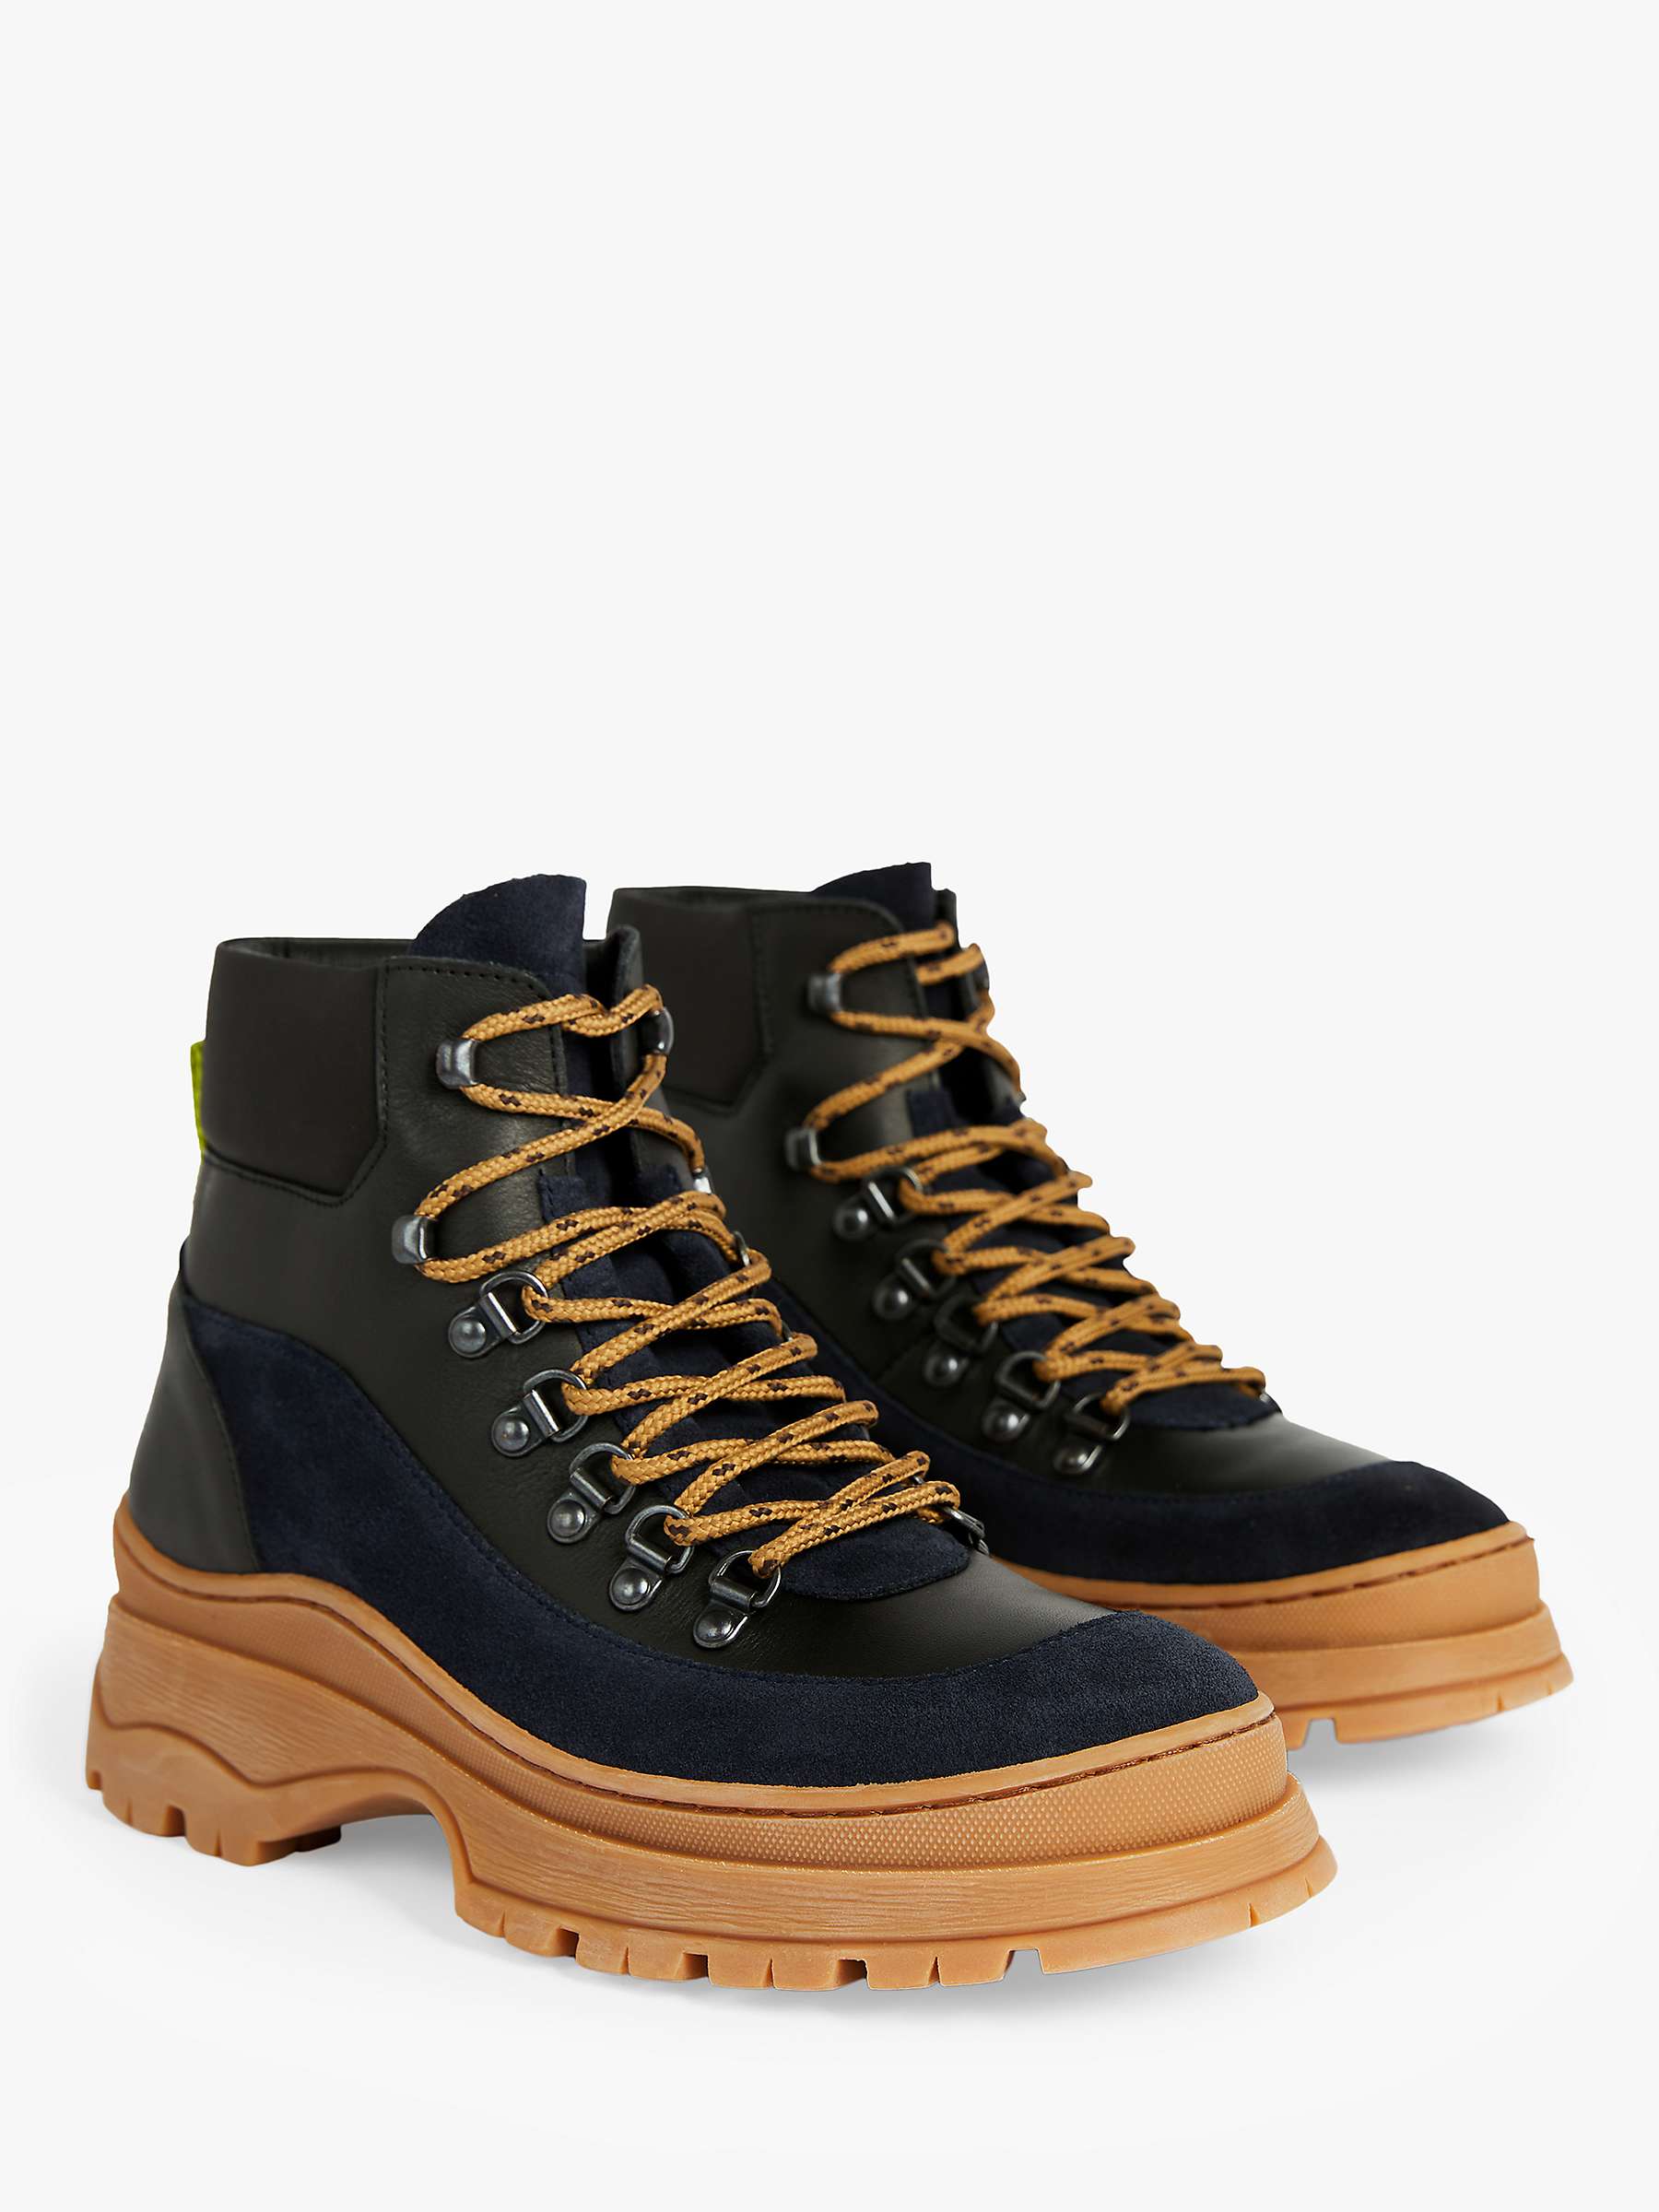 Ted Baker Allicia Leather Suede Hiker Boots, Black at John Lewis & Partners